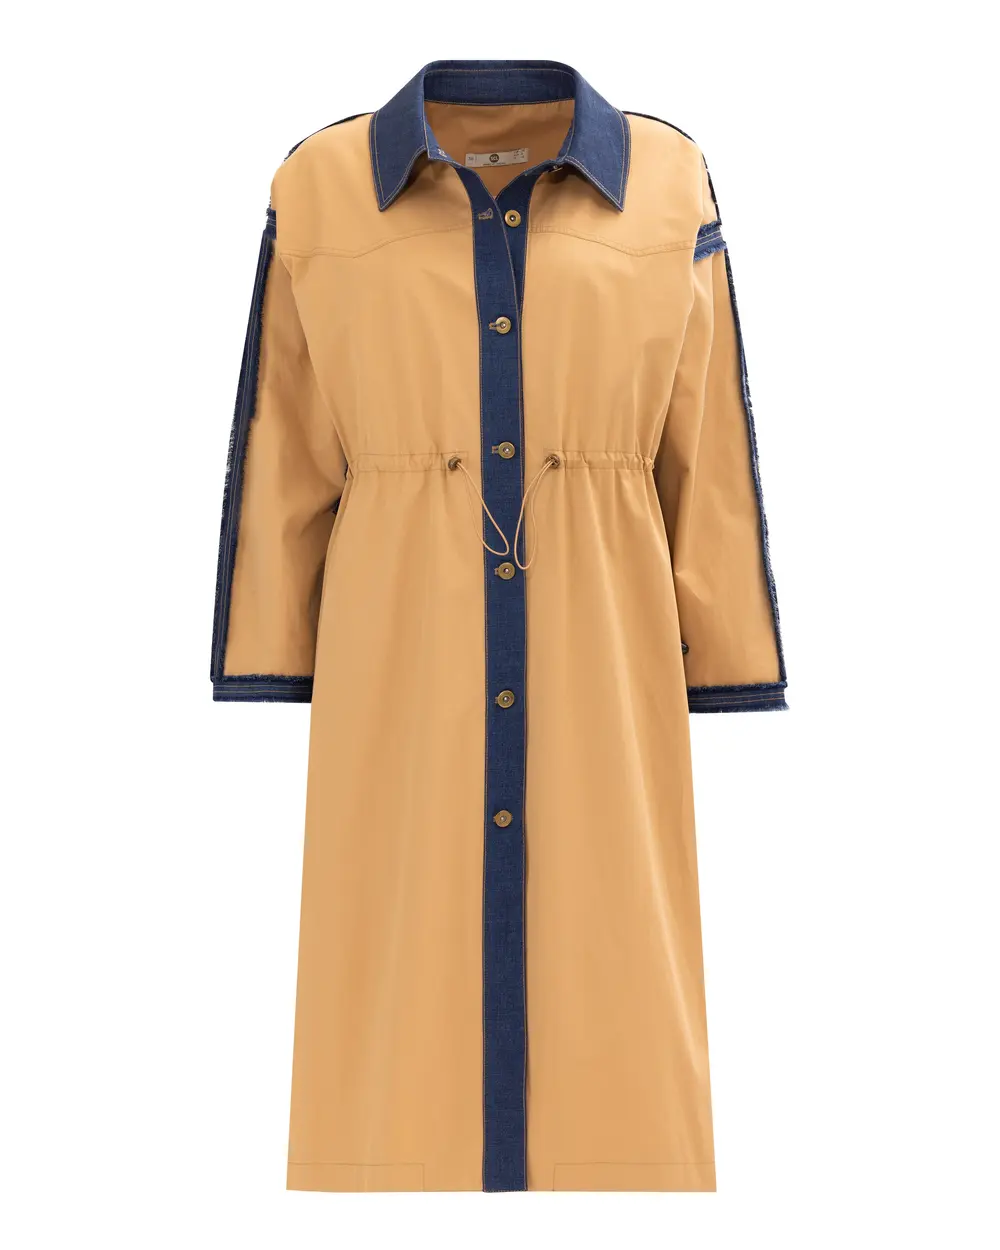 Buttoned Trench Coat with Drawstring Waist and Pocket Details